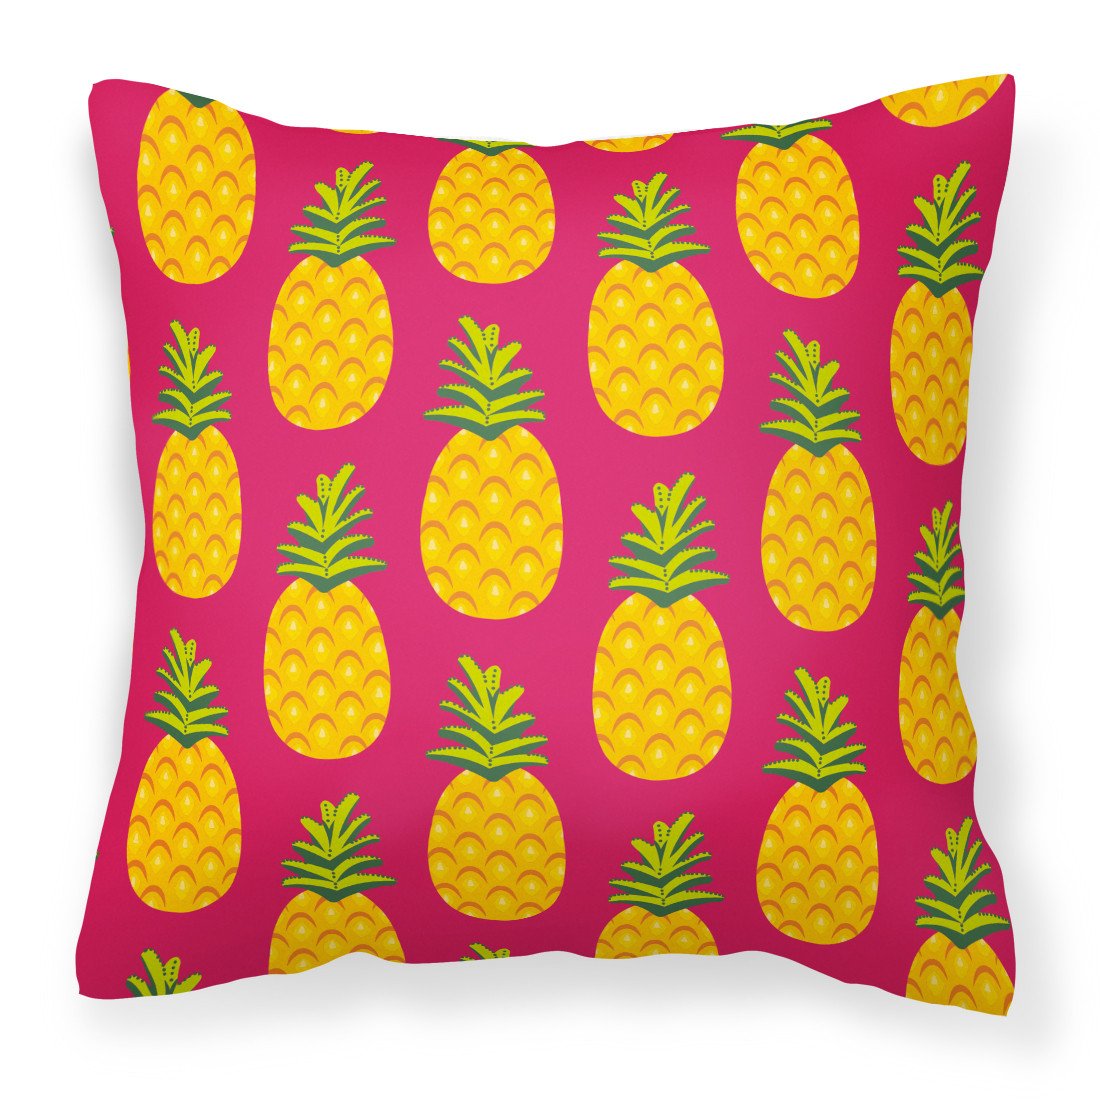 Pineapples on Pink Fabric Decorative Pillow BB5136PW1818 by Caroline's Treasures